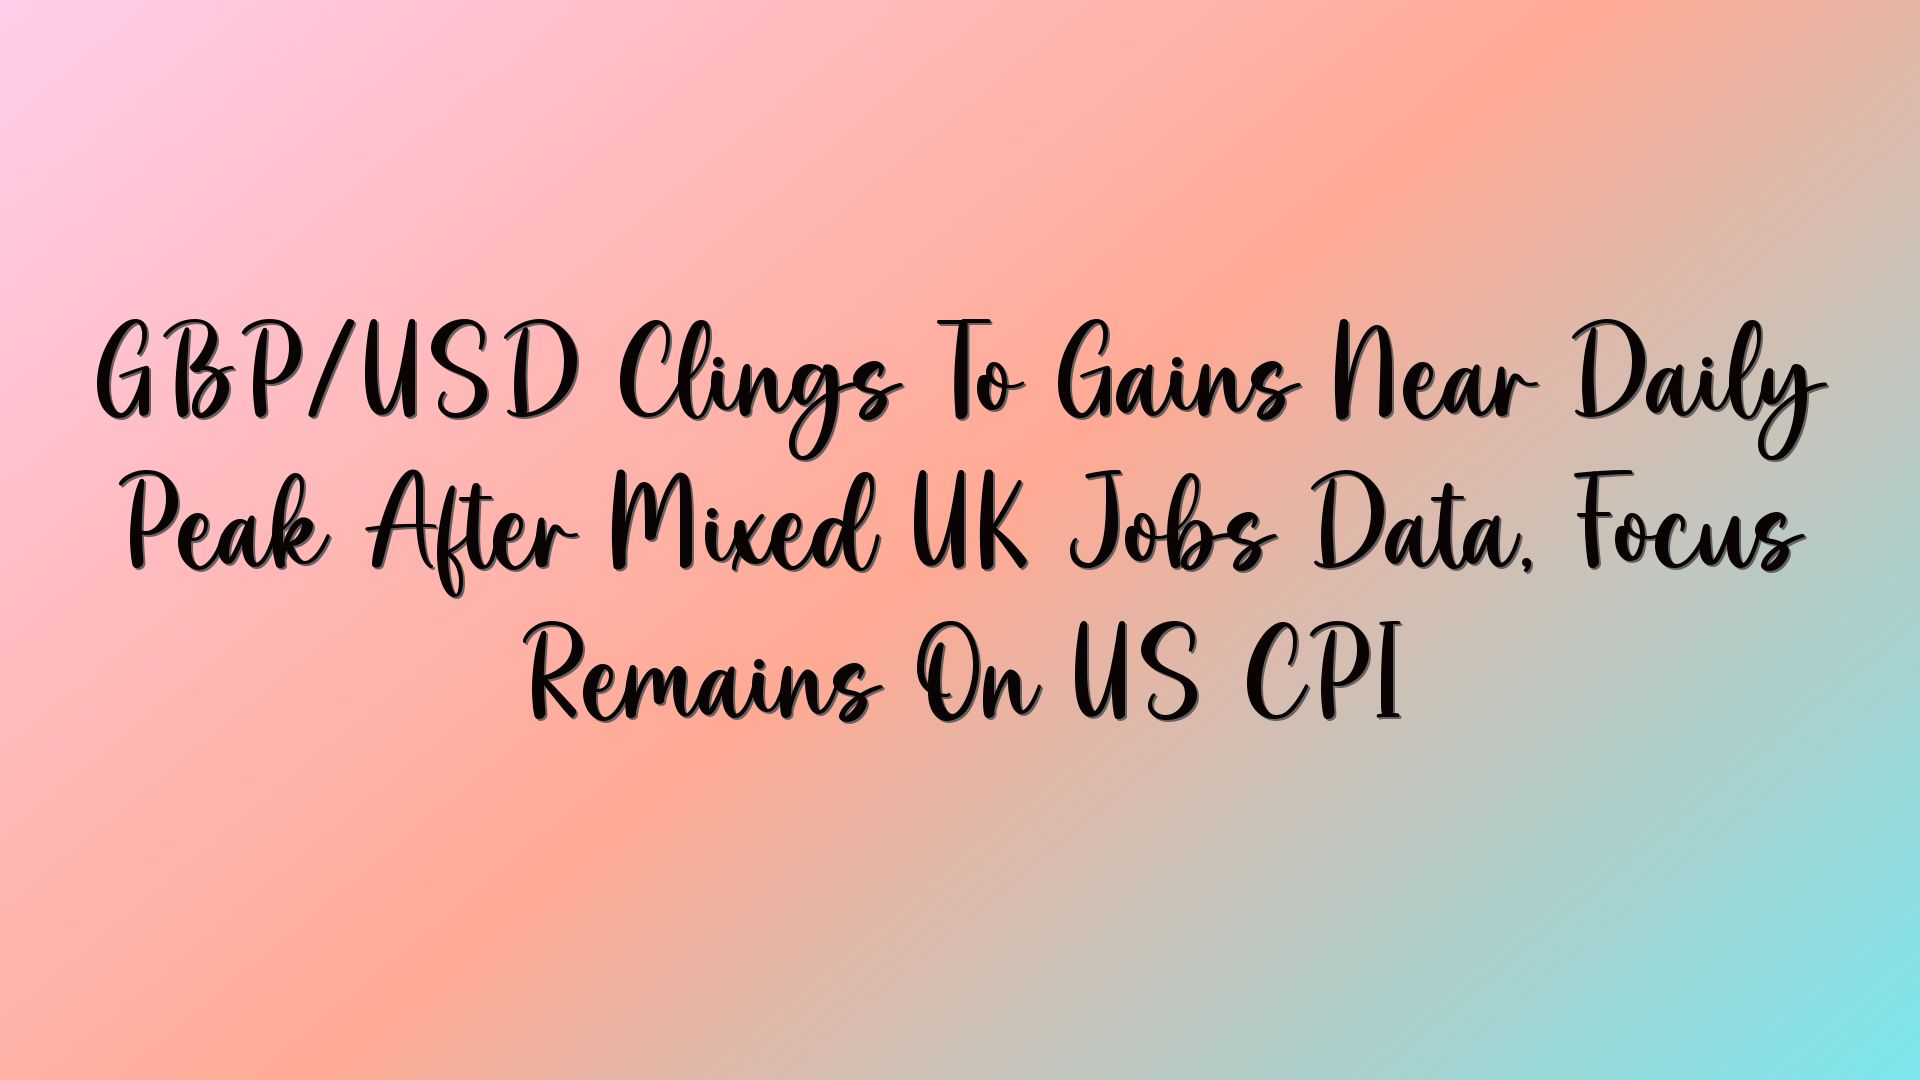 GBP/USD Clings To Gains Near Daily Peak After Mixed UK Jobs Data, Focus Remains On US CPI